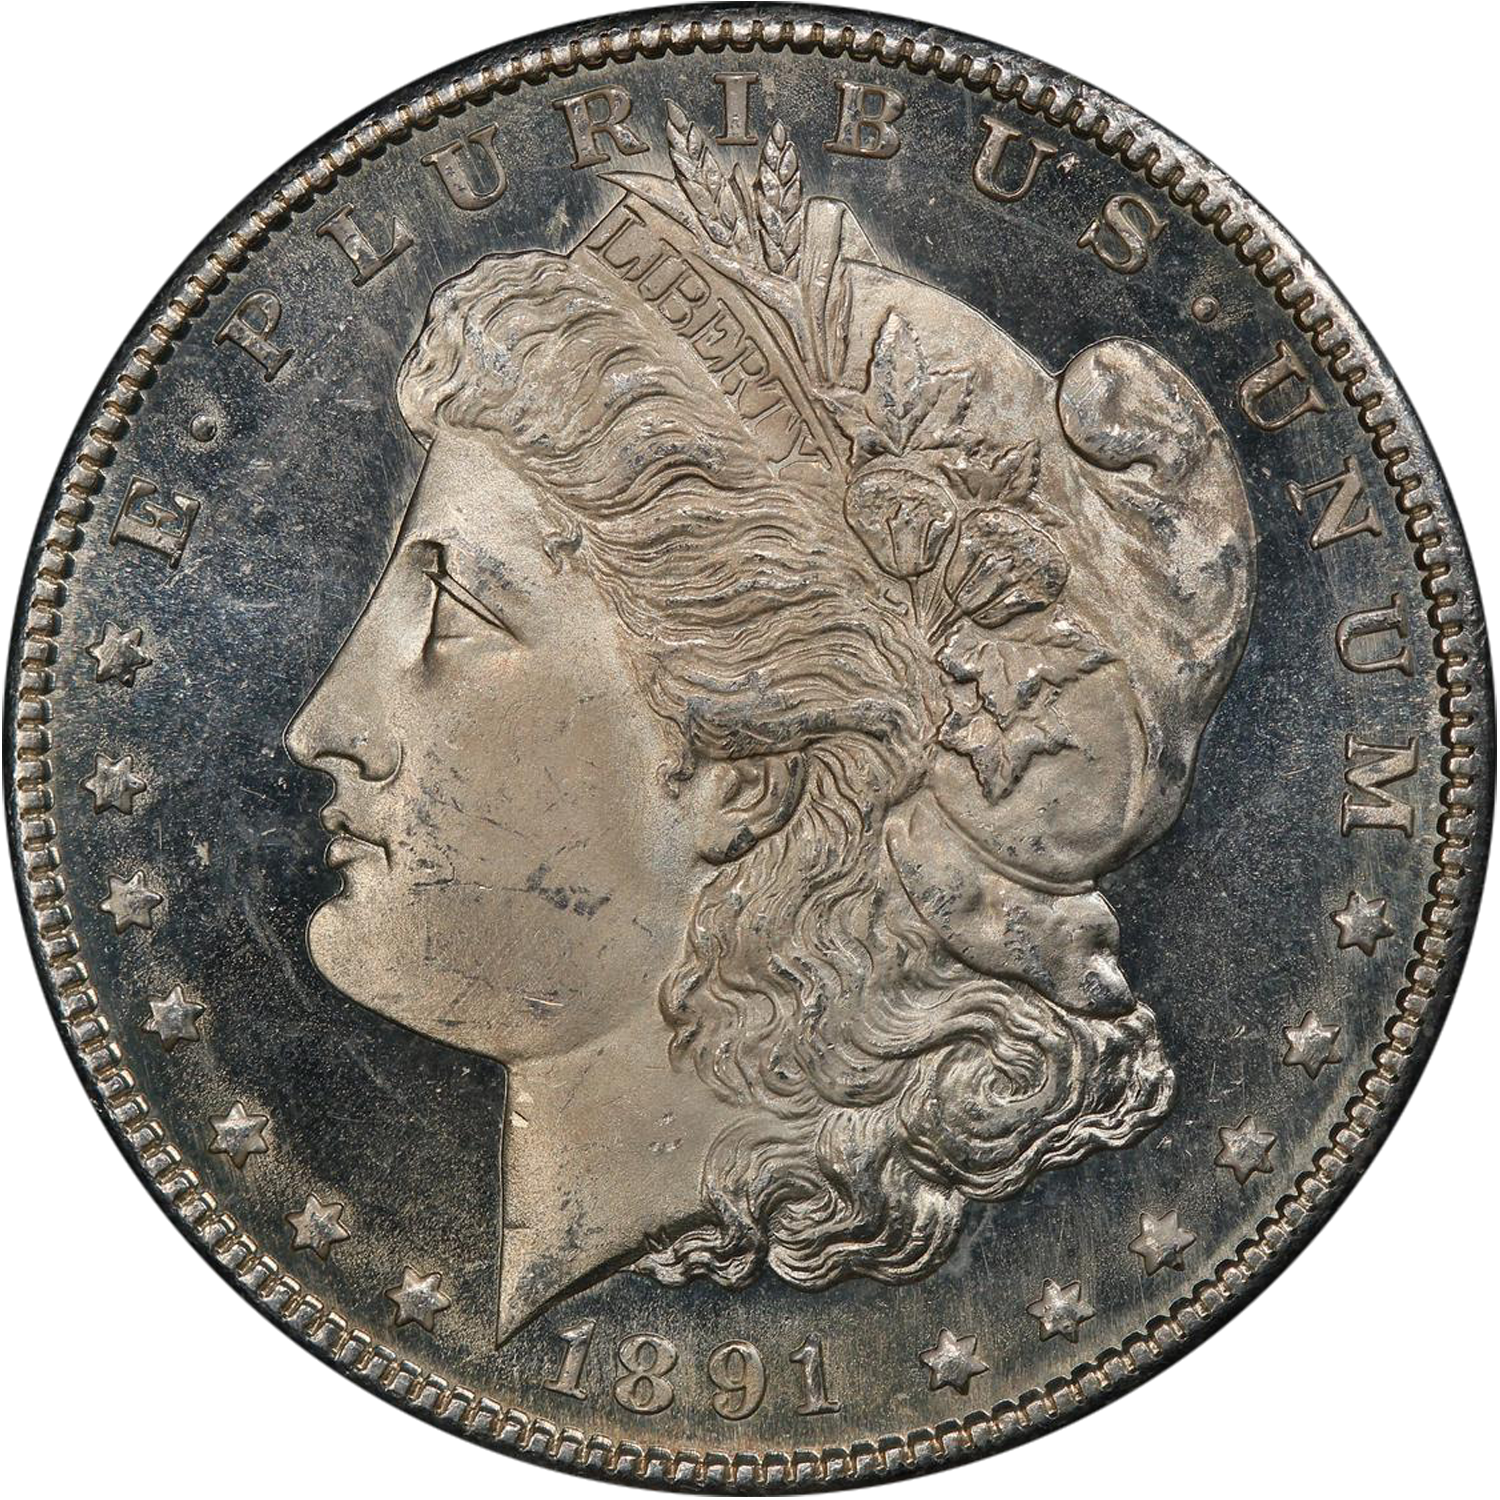 1891 prooflike s mint morgan dollar price guide value